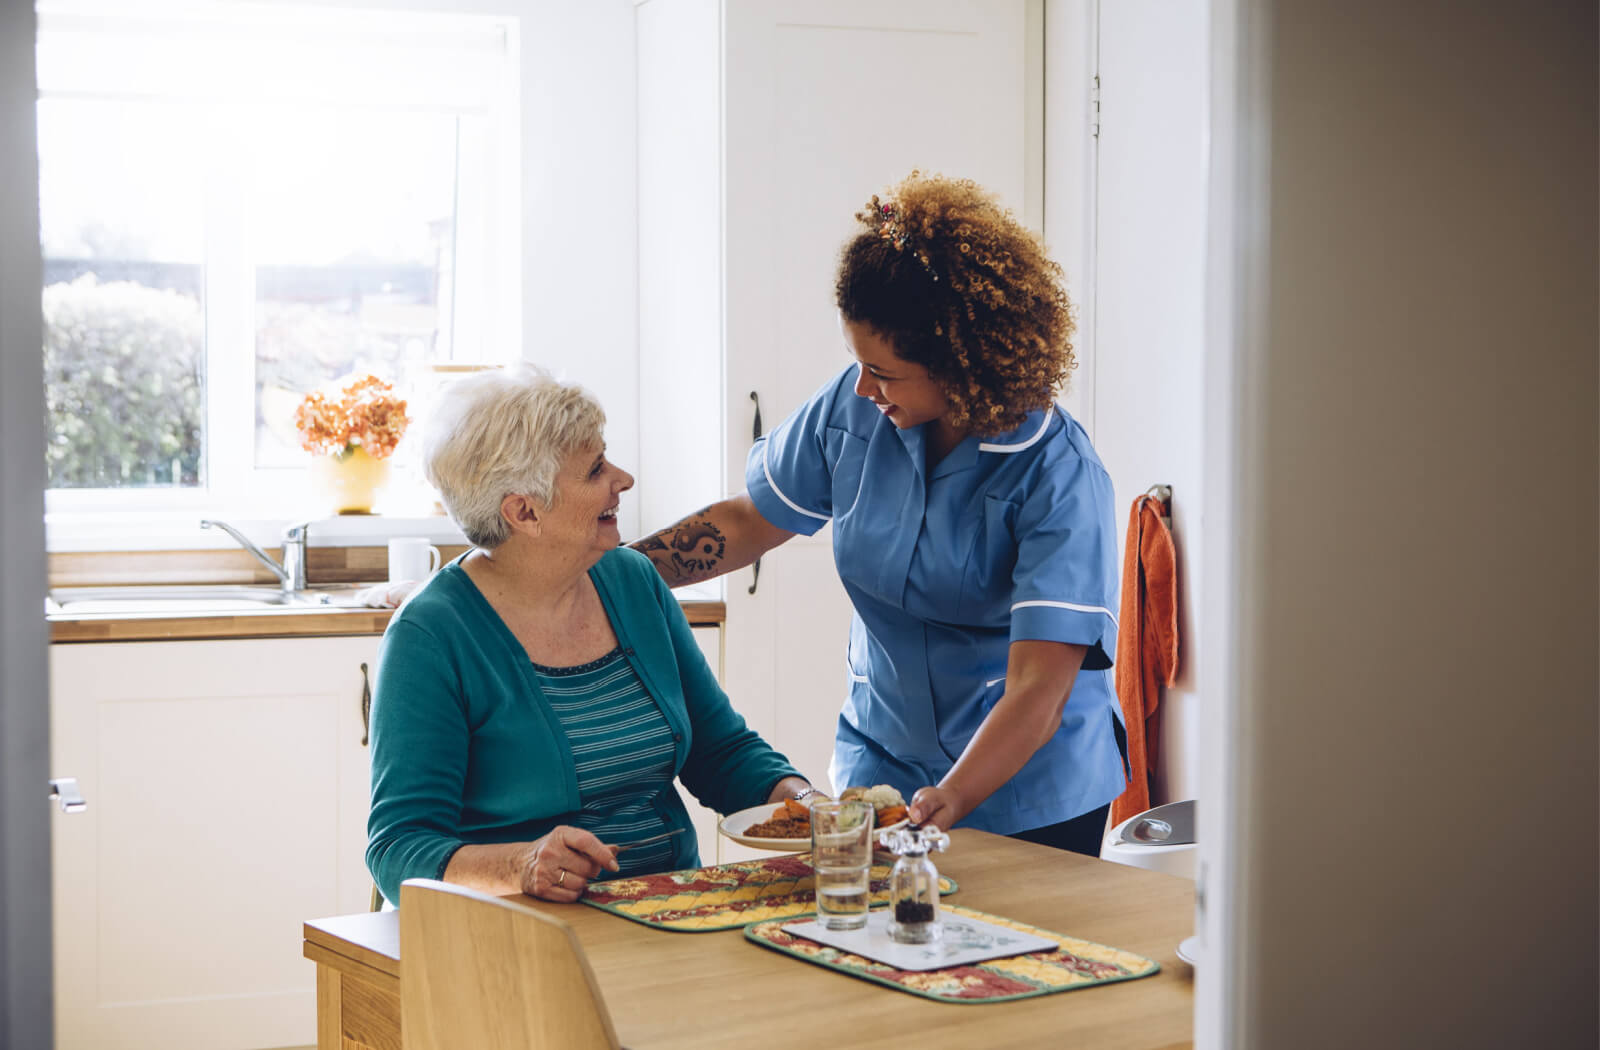 A personal care home staff serving food to one of its senior residents